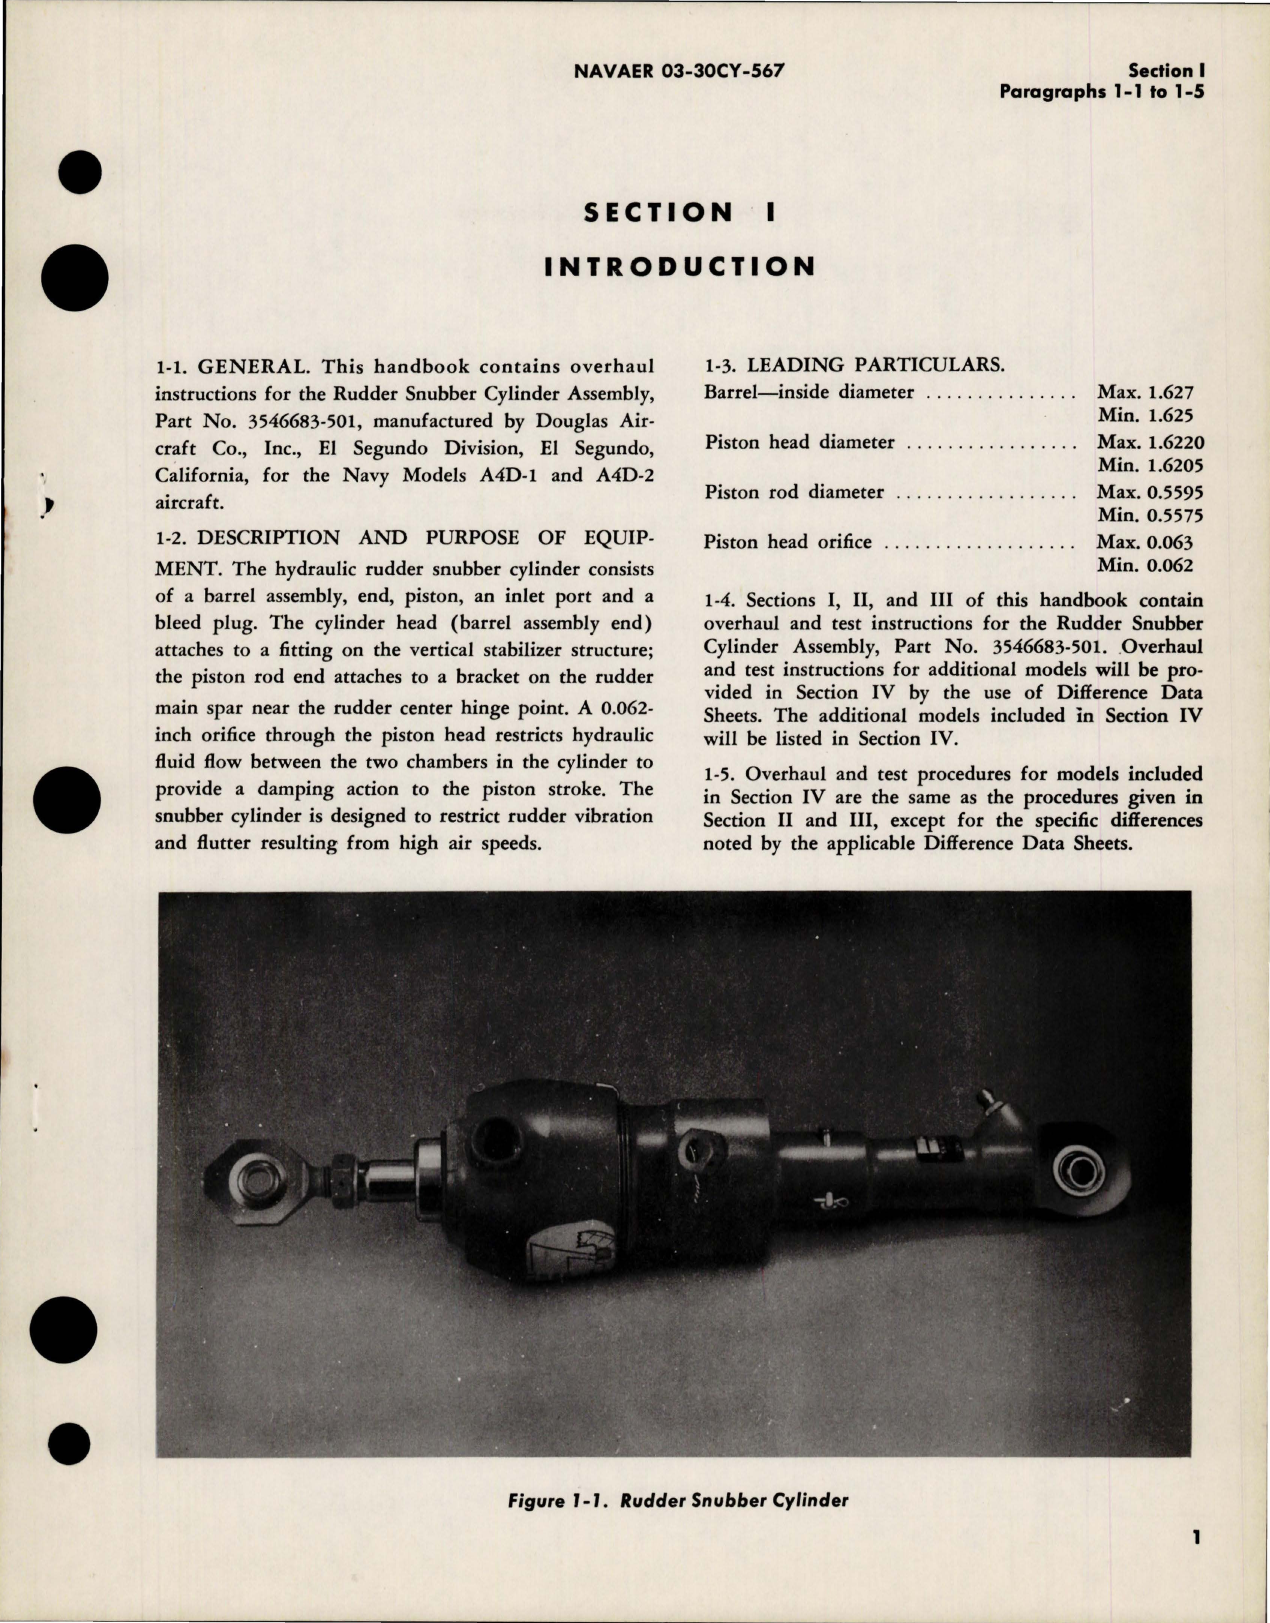 Sample page 5 from AirCorps Library document: Overhaul Instructions for Rudder Snubber Cylinder - Part 3546683-501